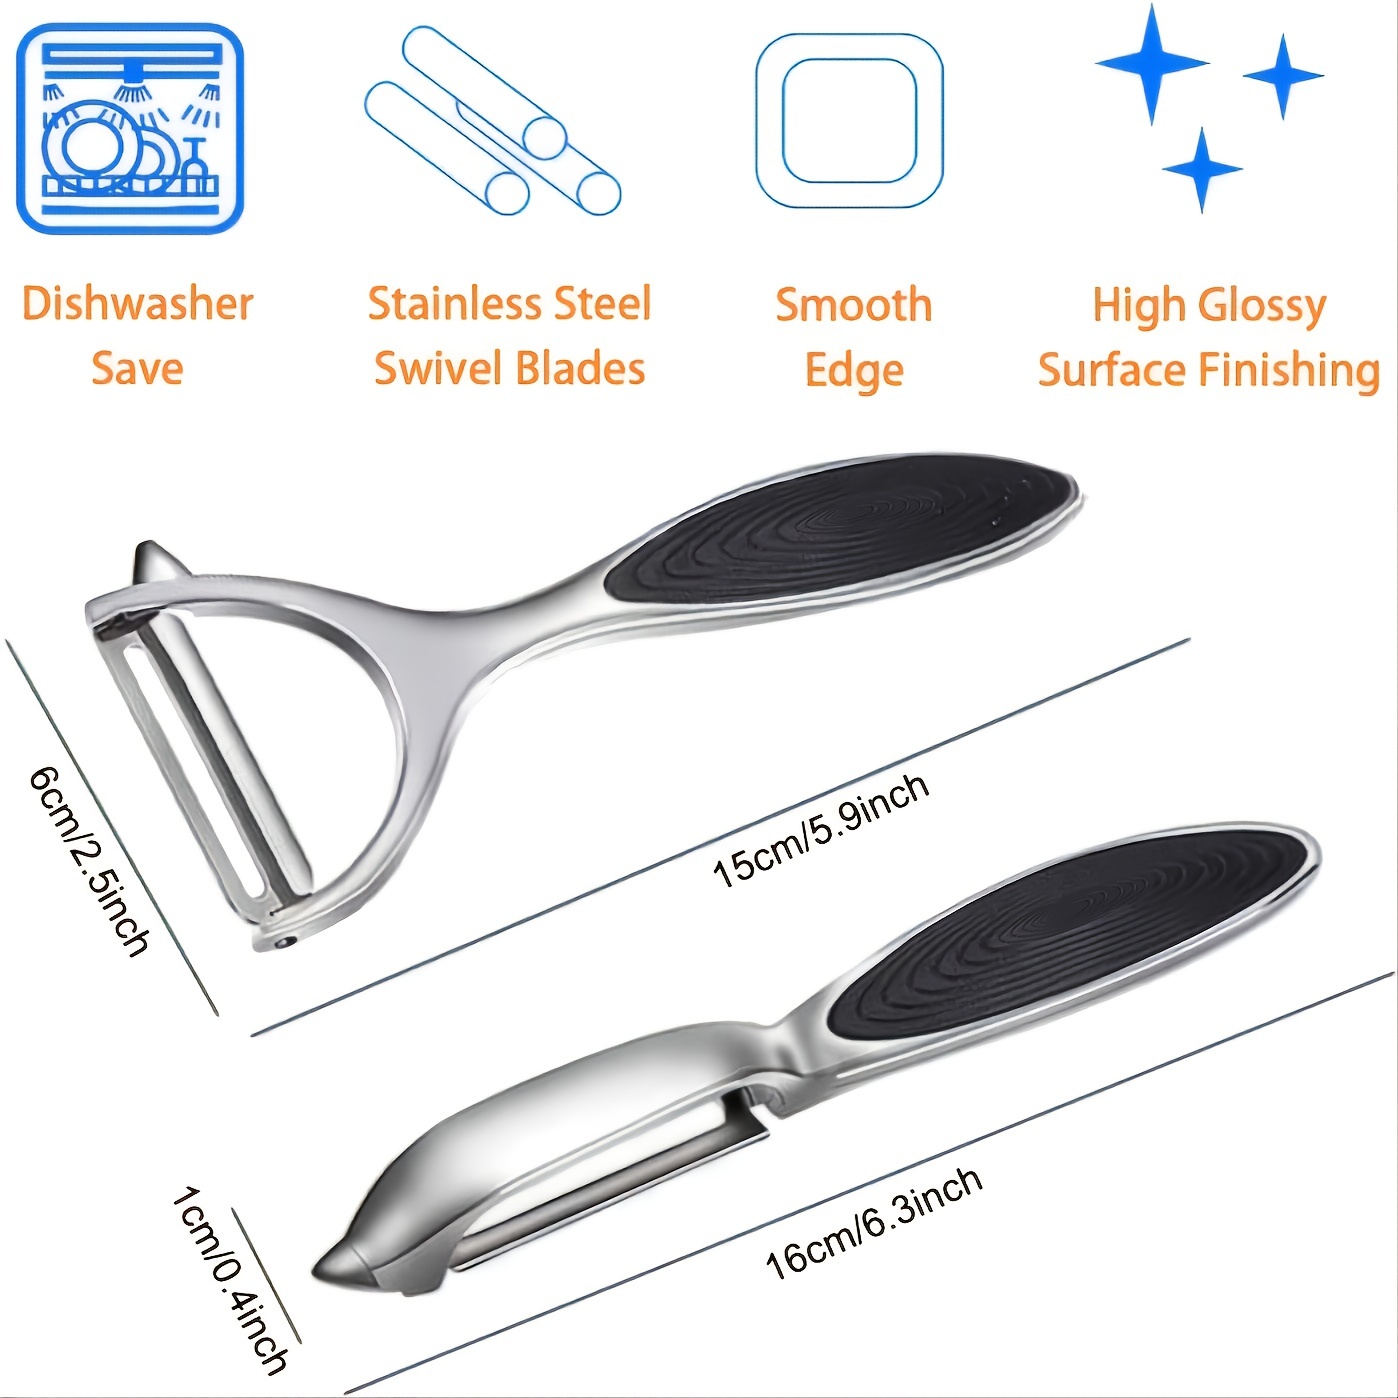 Choice 6 Smooth Y Peeler with Stainless Steel Blade